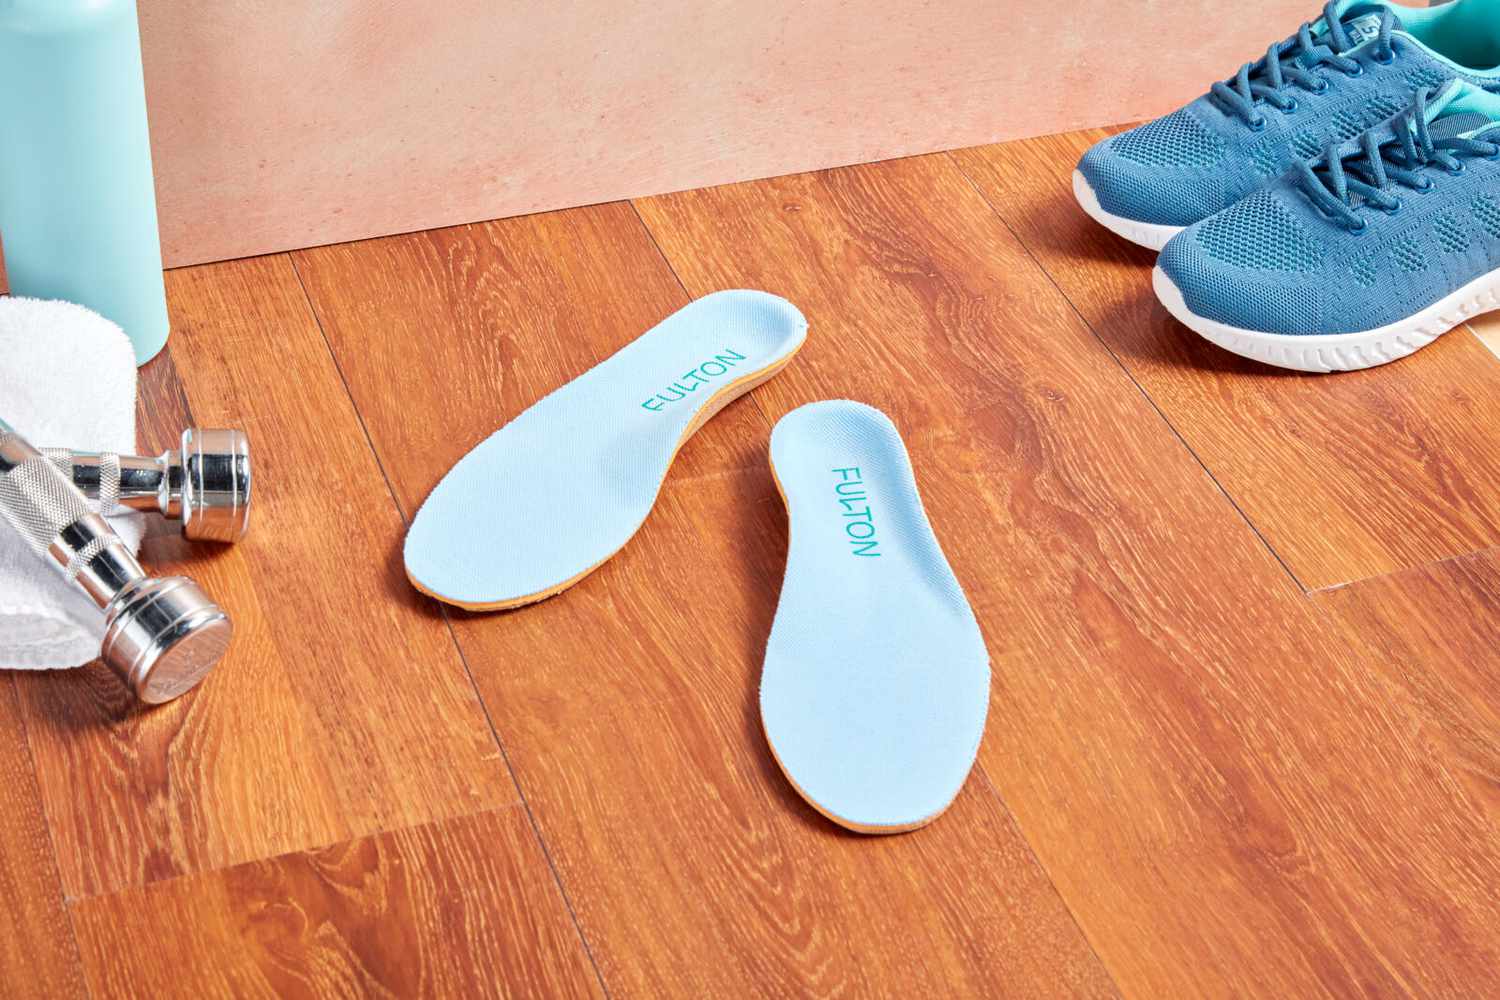 Fulton The Athletic Insoles displayed on a wooden floor with sneakers and dumbbells